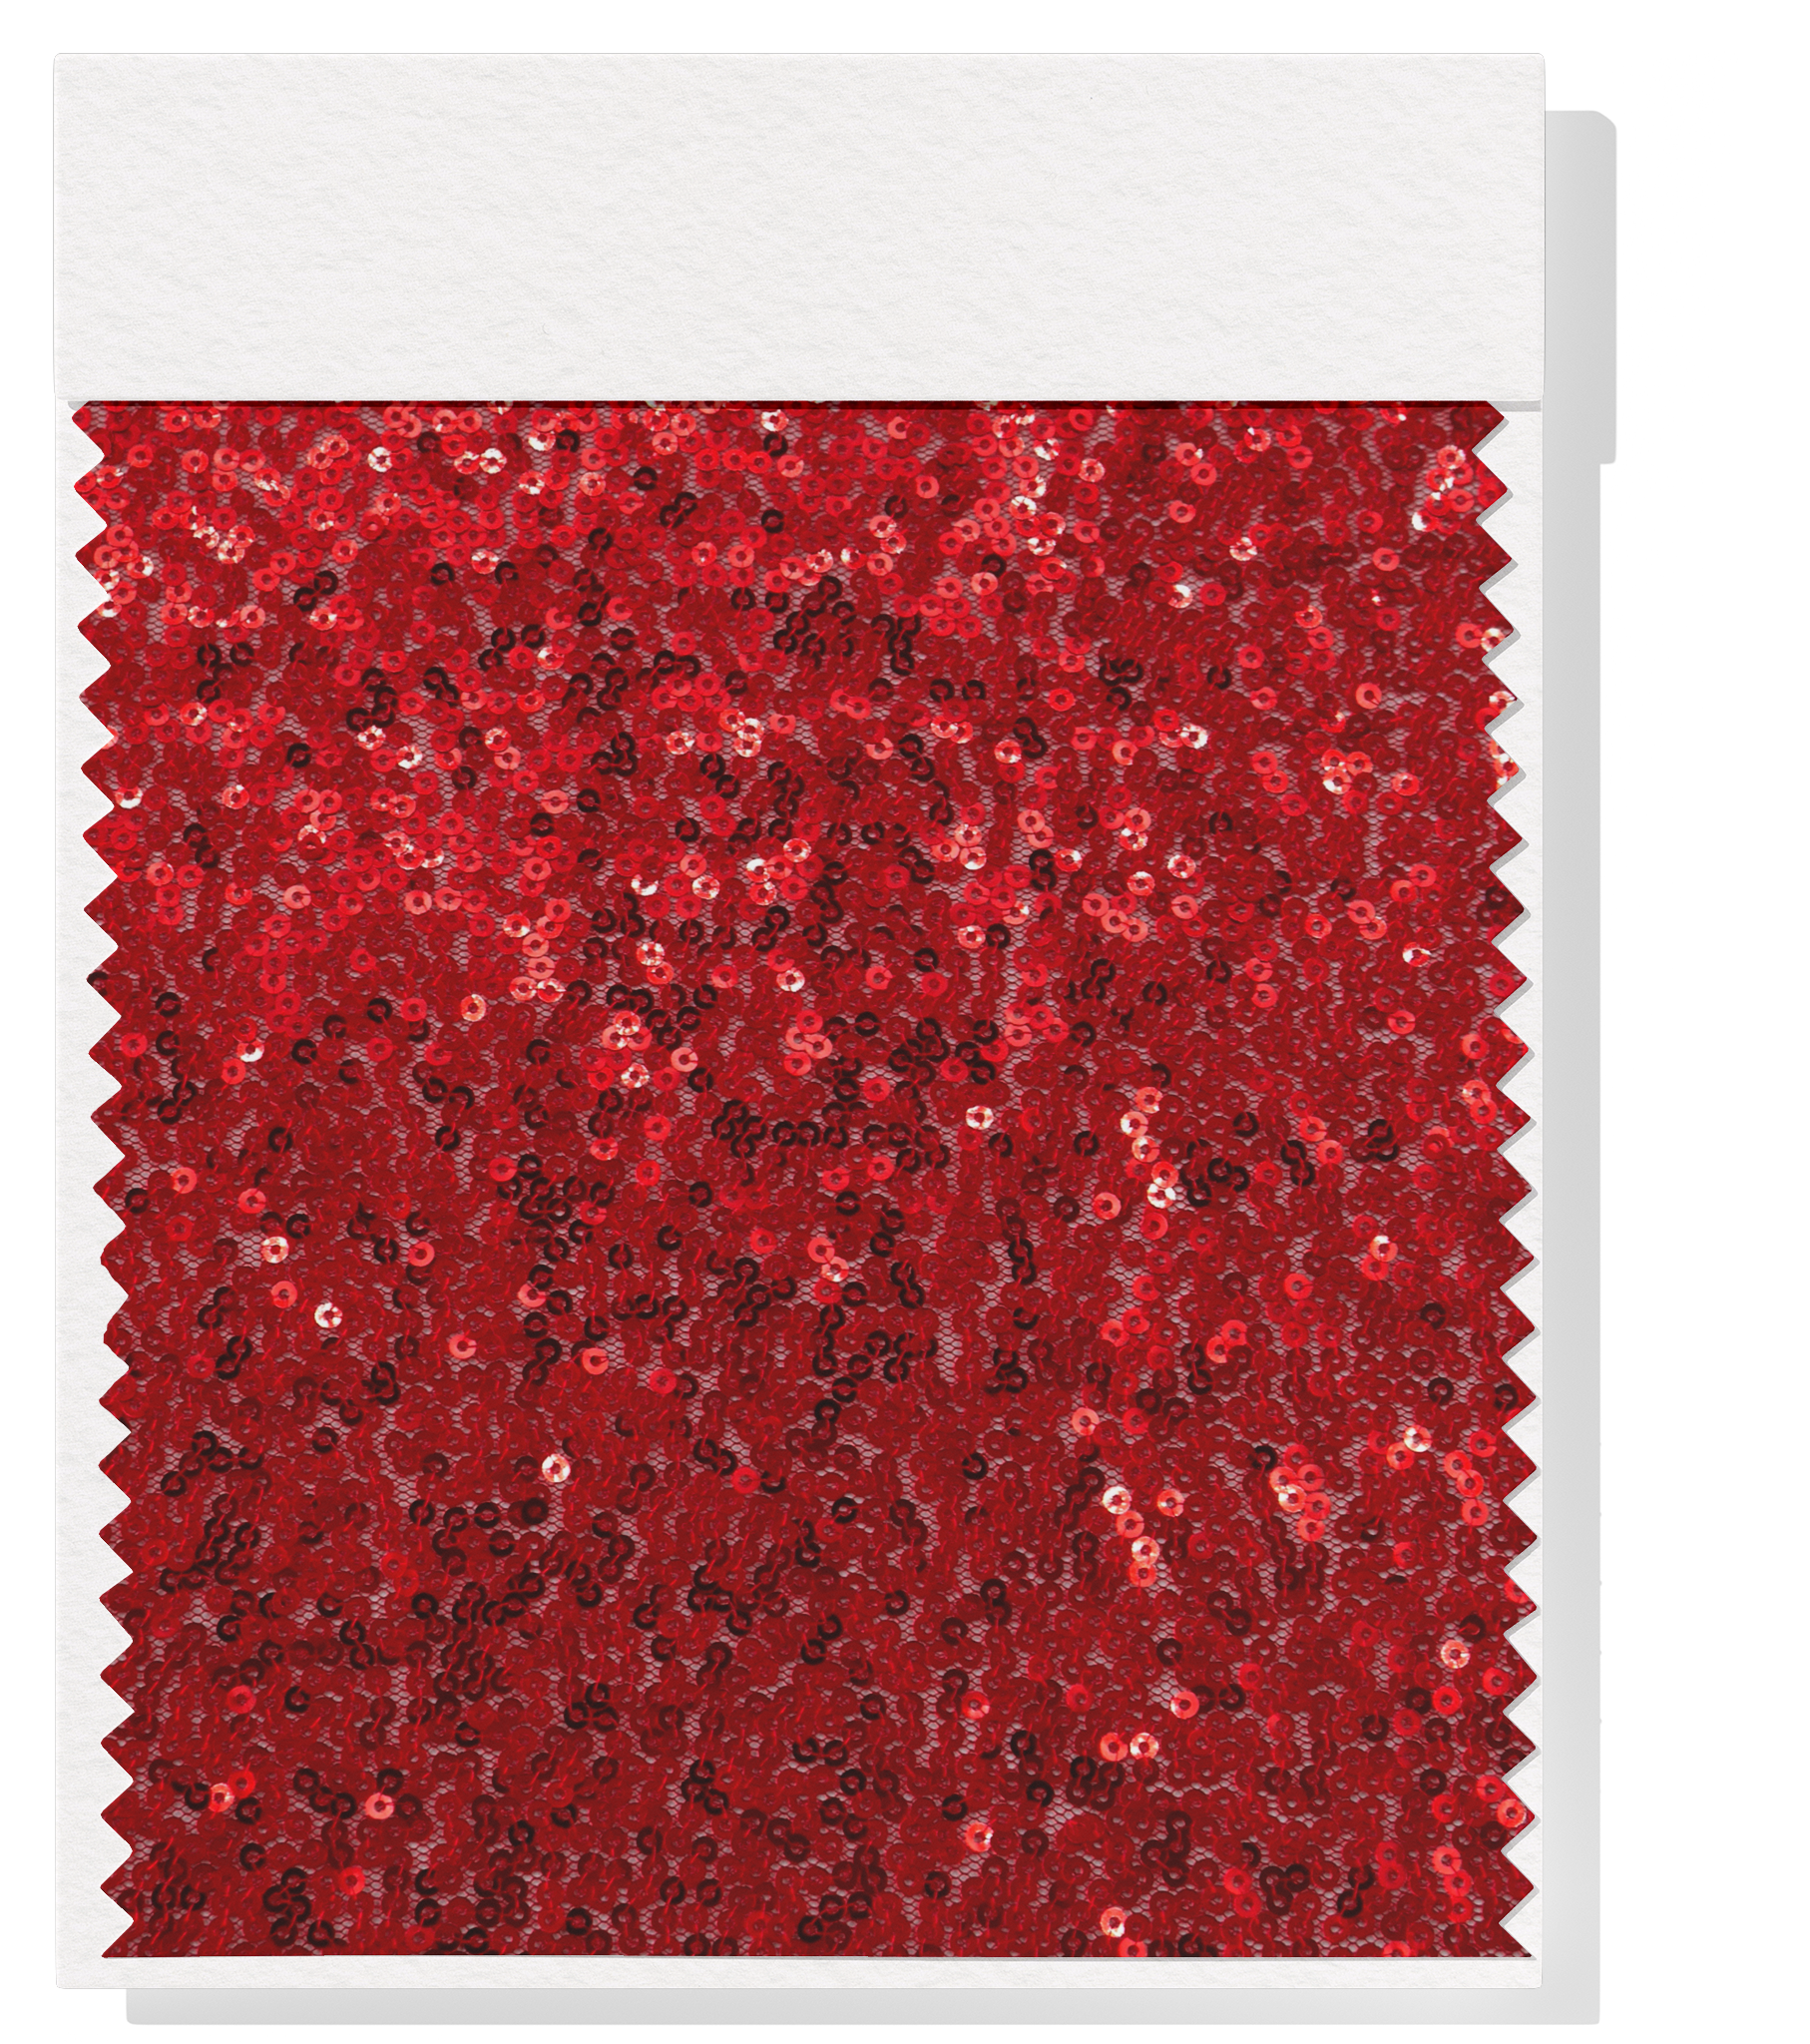 Polyester Mesh Sequins $25.00p/m - Red